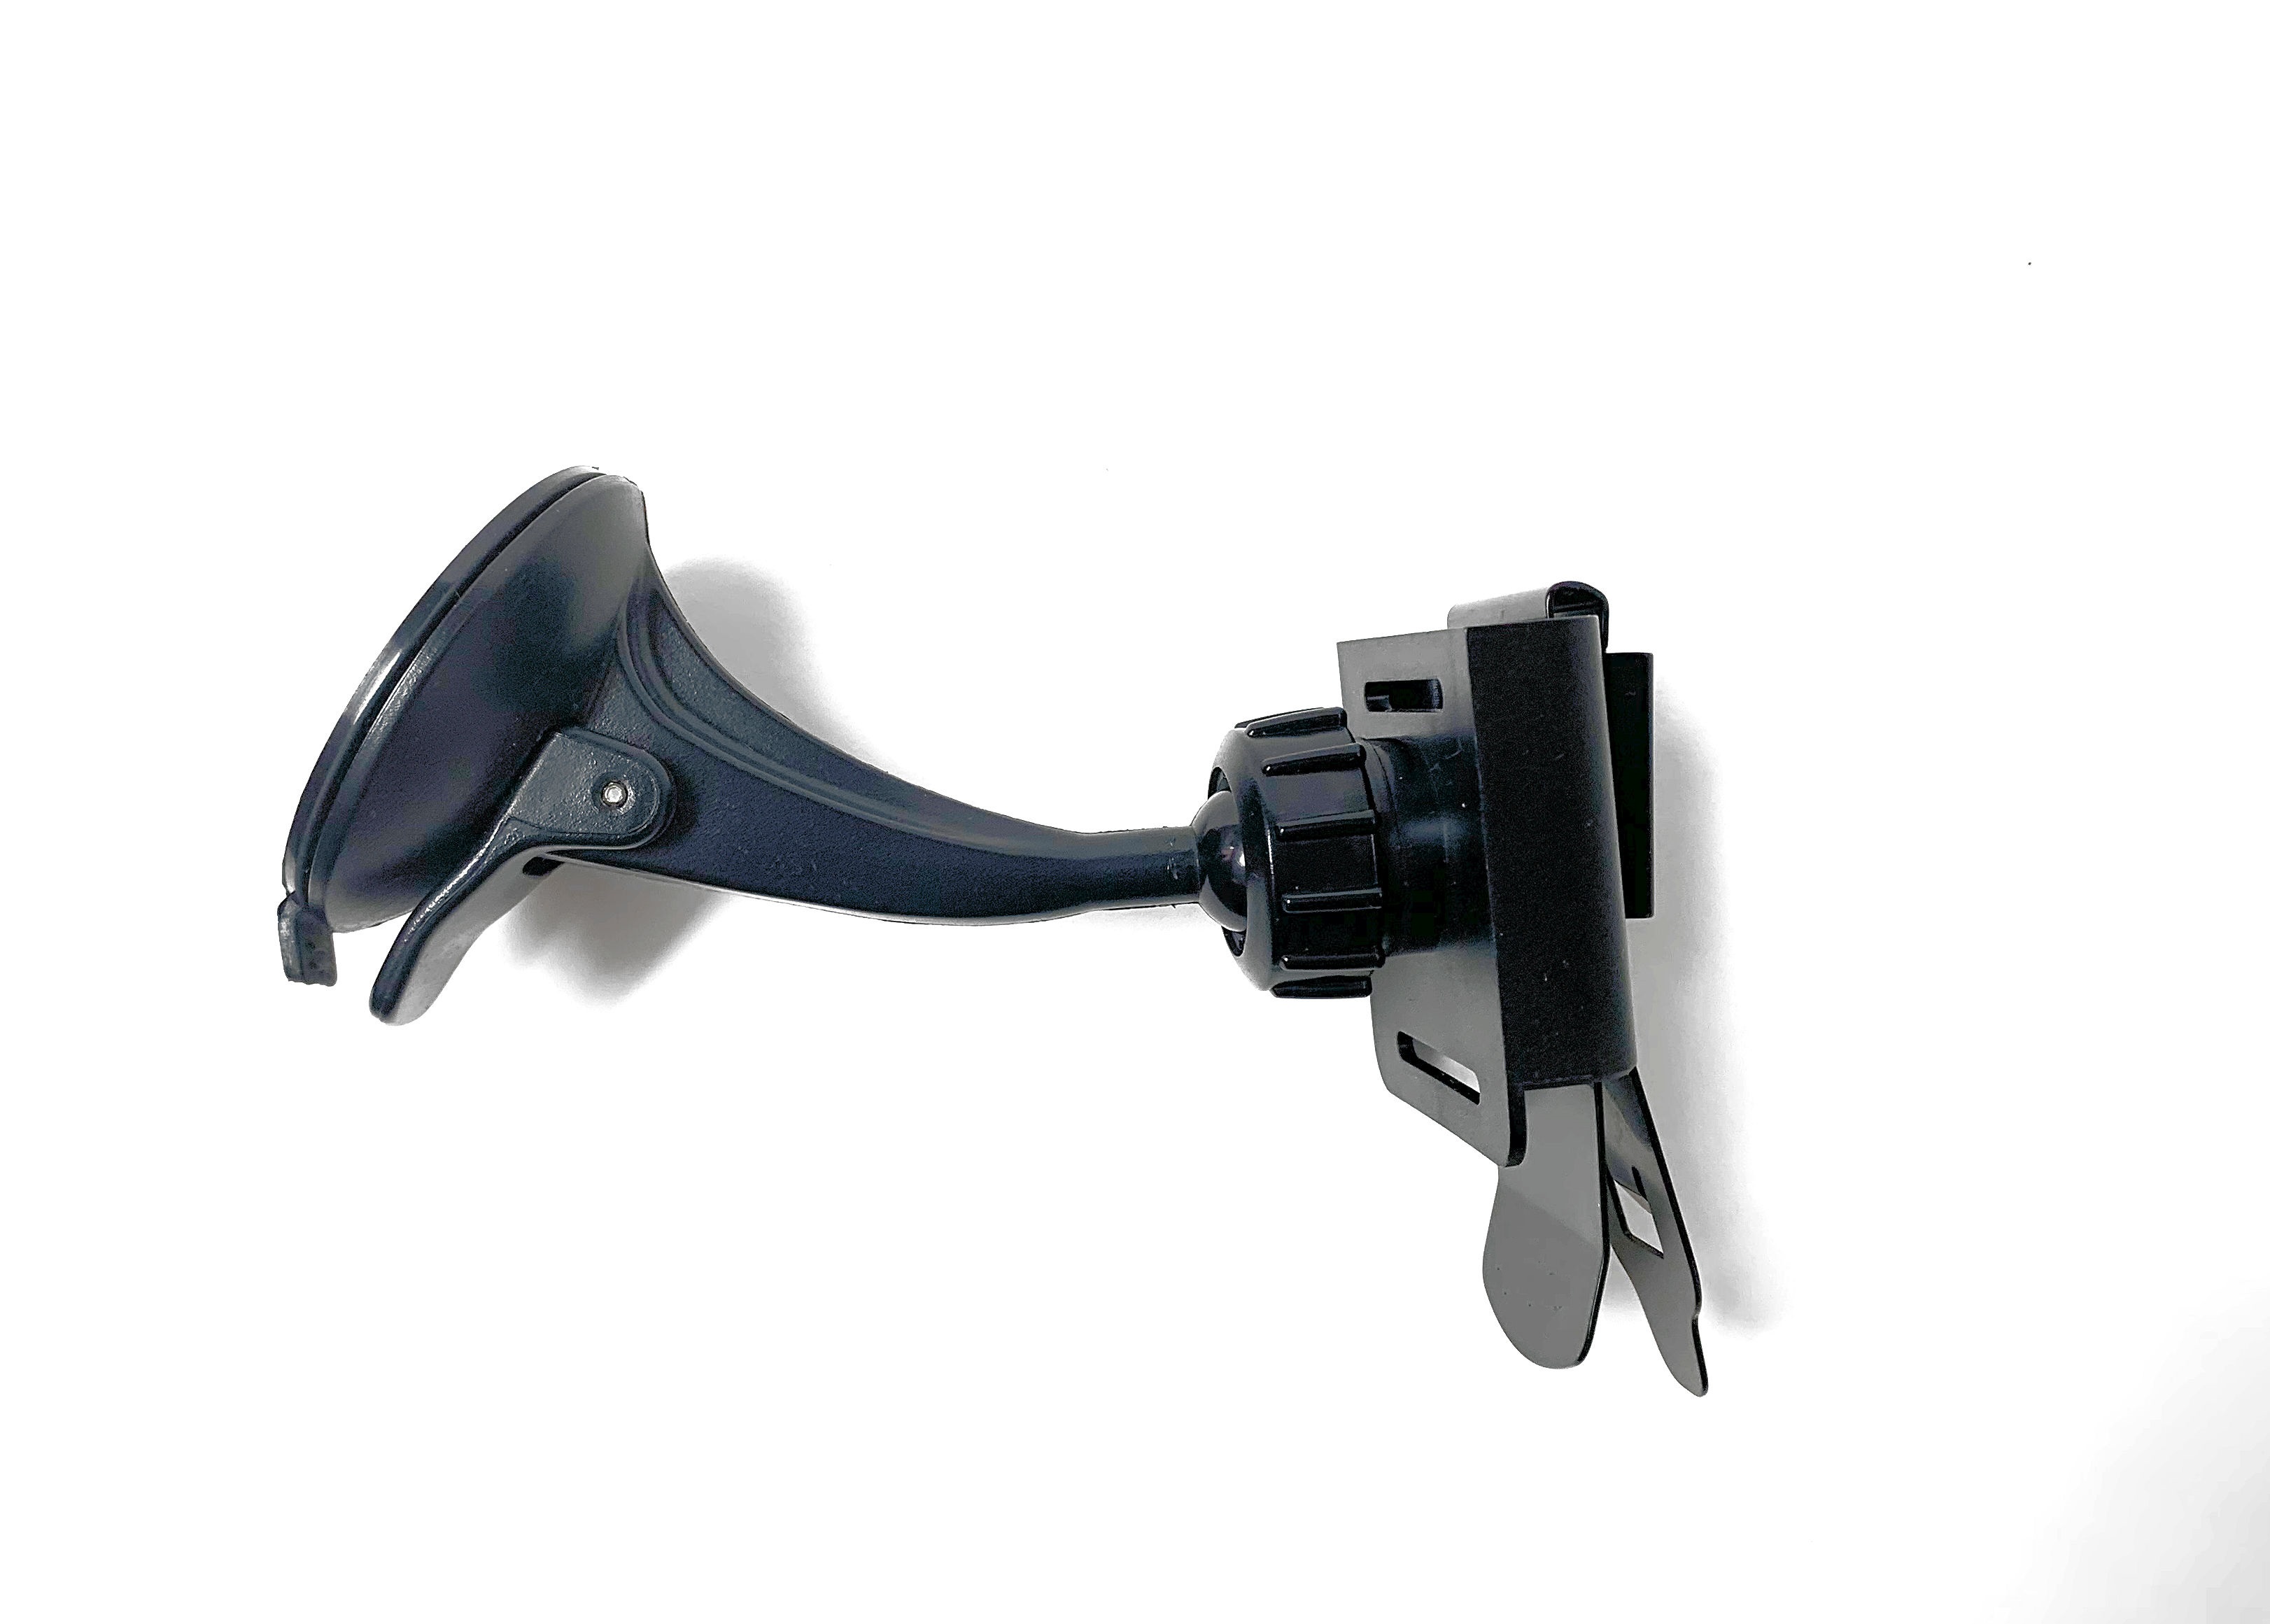 Suction Ball Tip Mount with Klipzer connector for Garmin Handheld